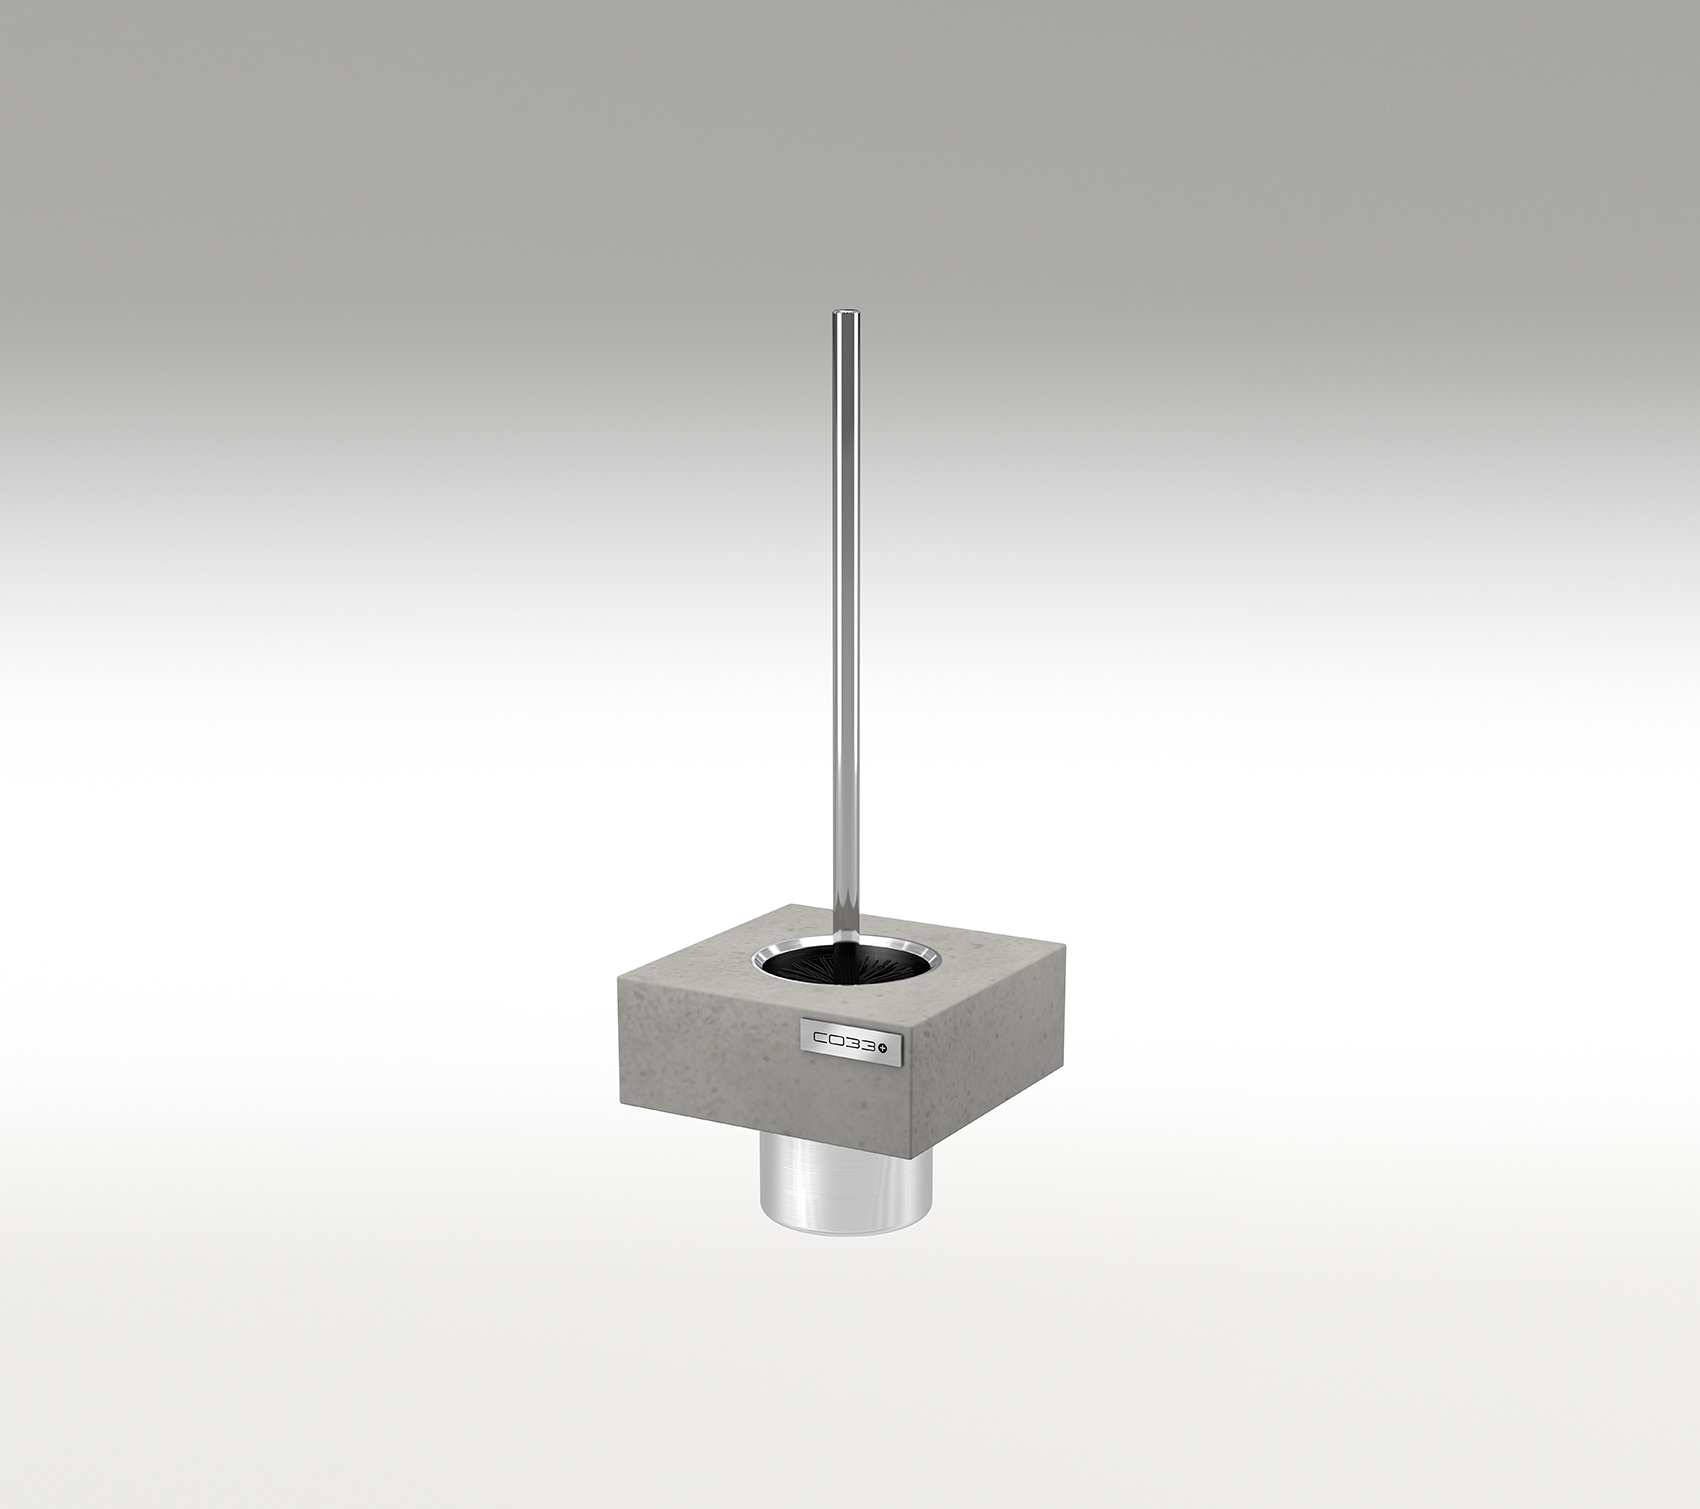 Premium Toilet Brush Holder made with real concrete and hygienic stainless steel insert